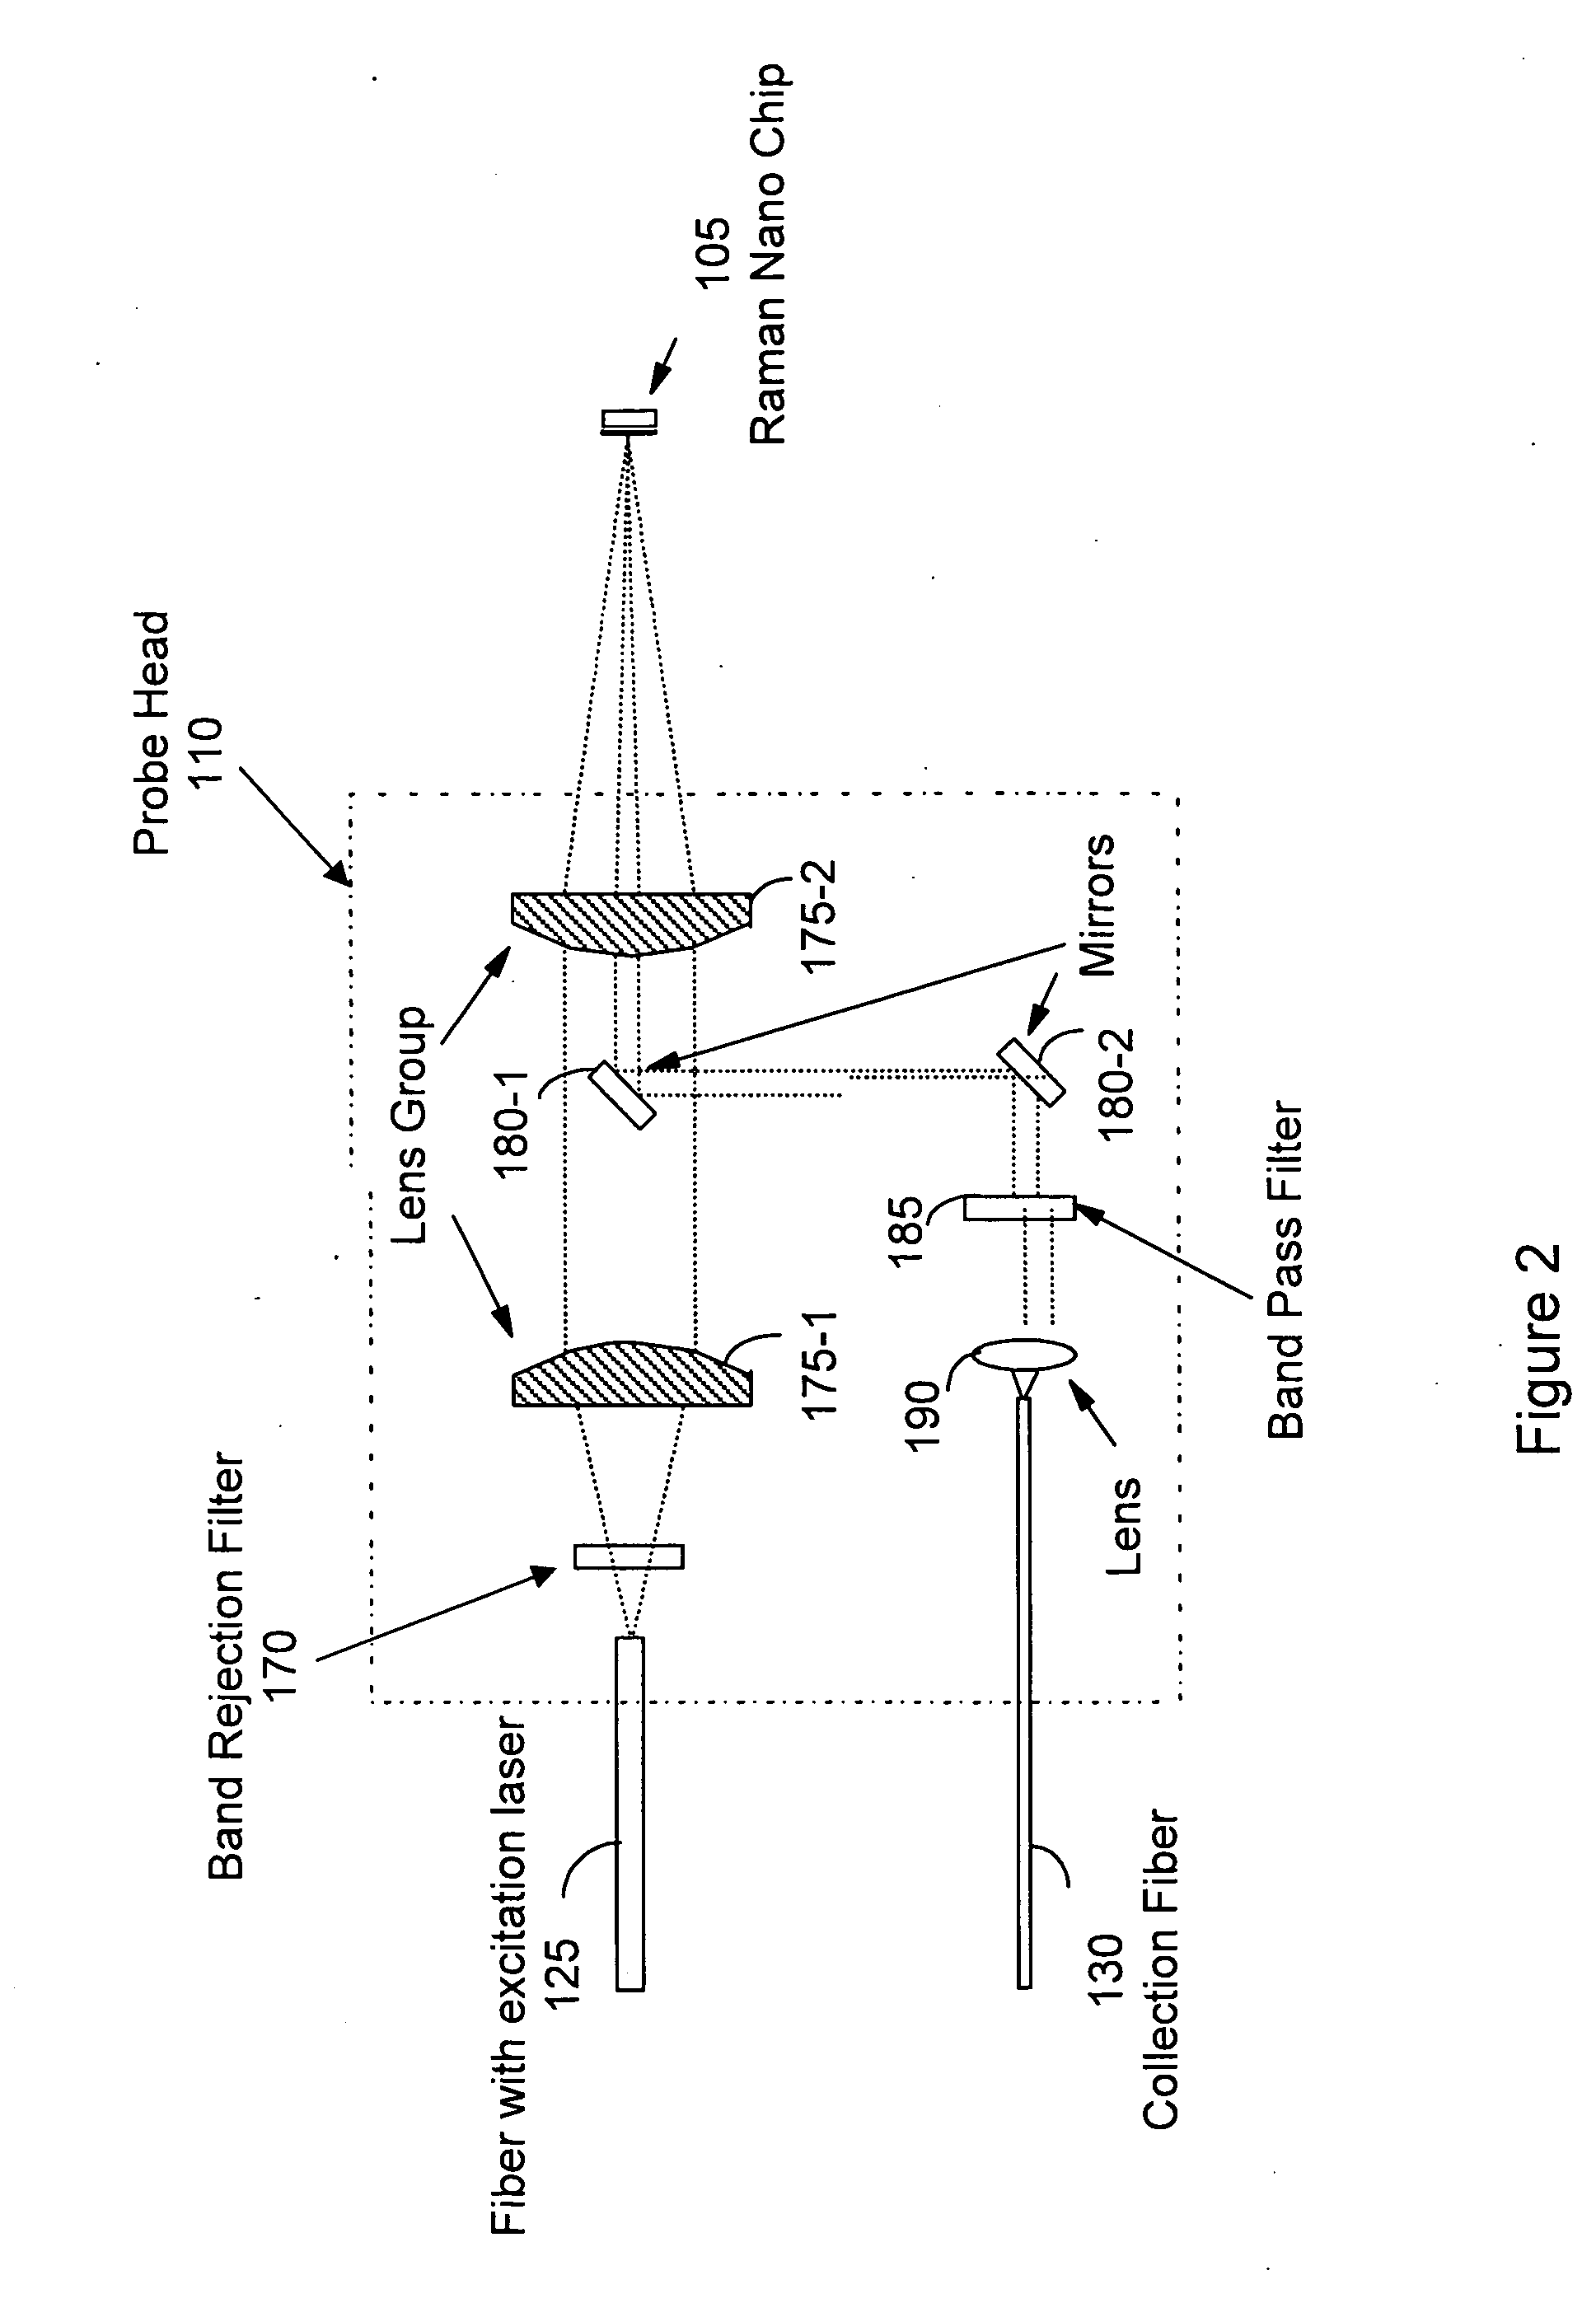 Systems and methods for food safety detection